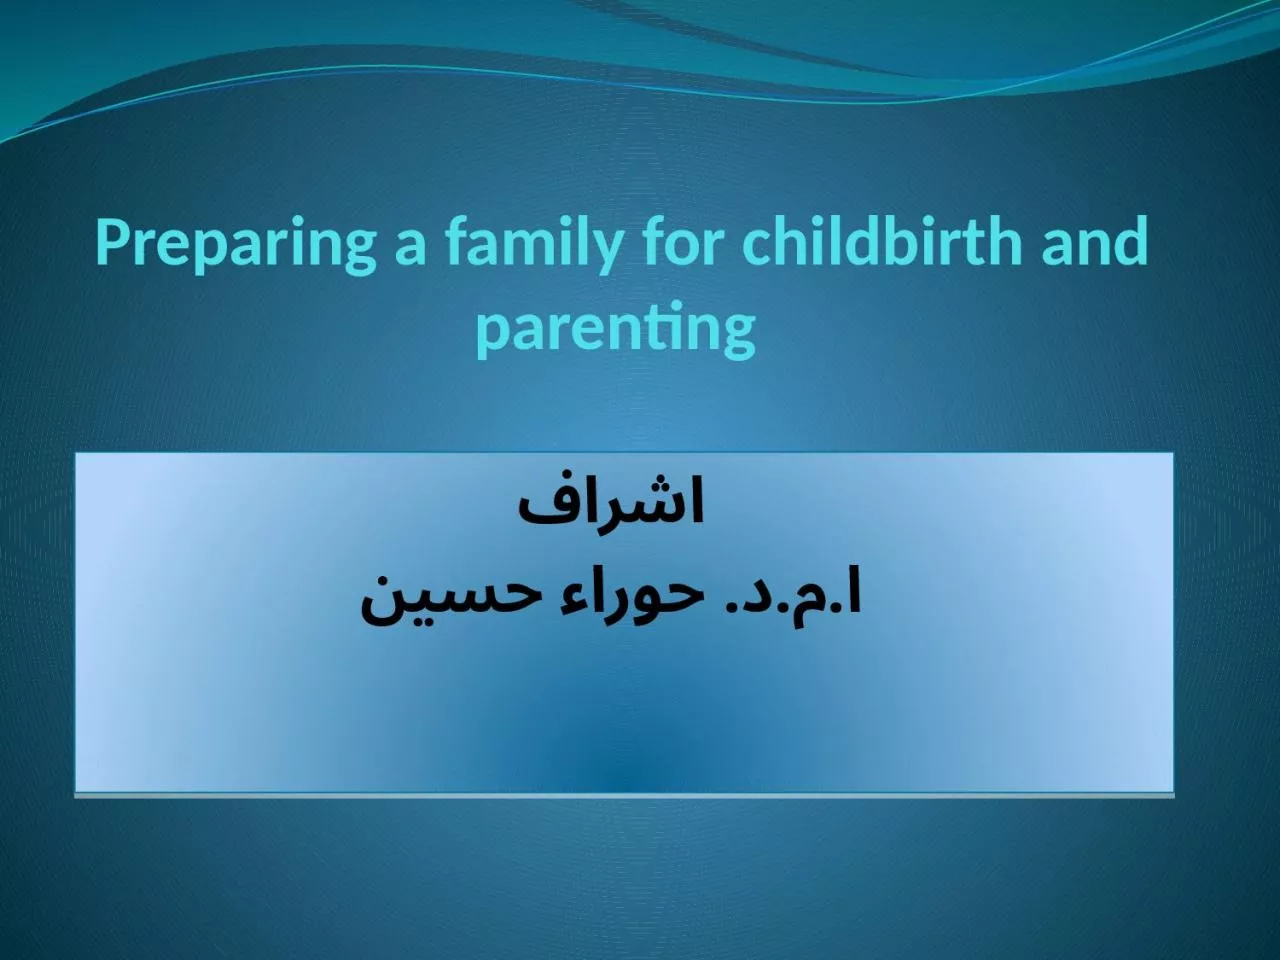 Preparing a family for childbirth and parenting